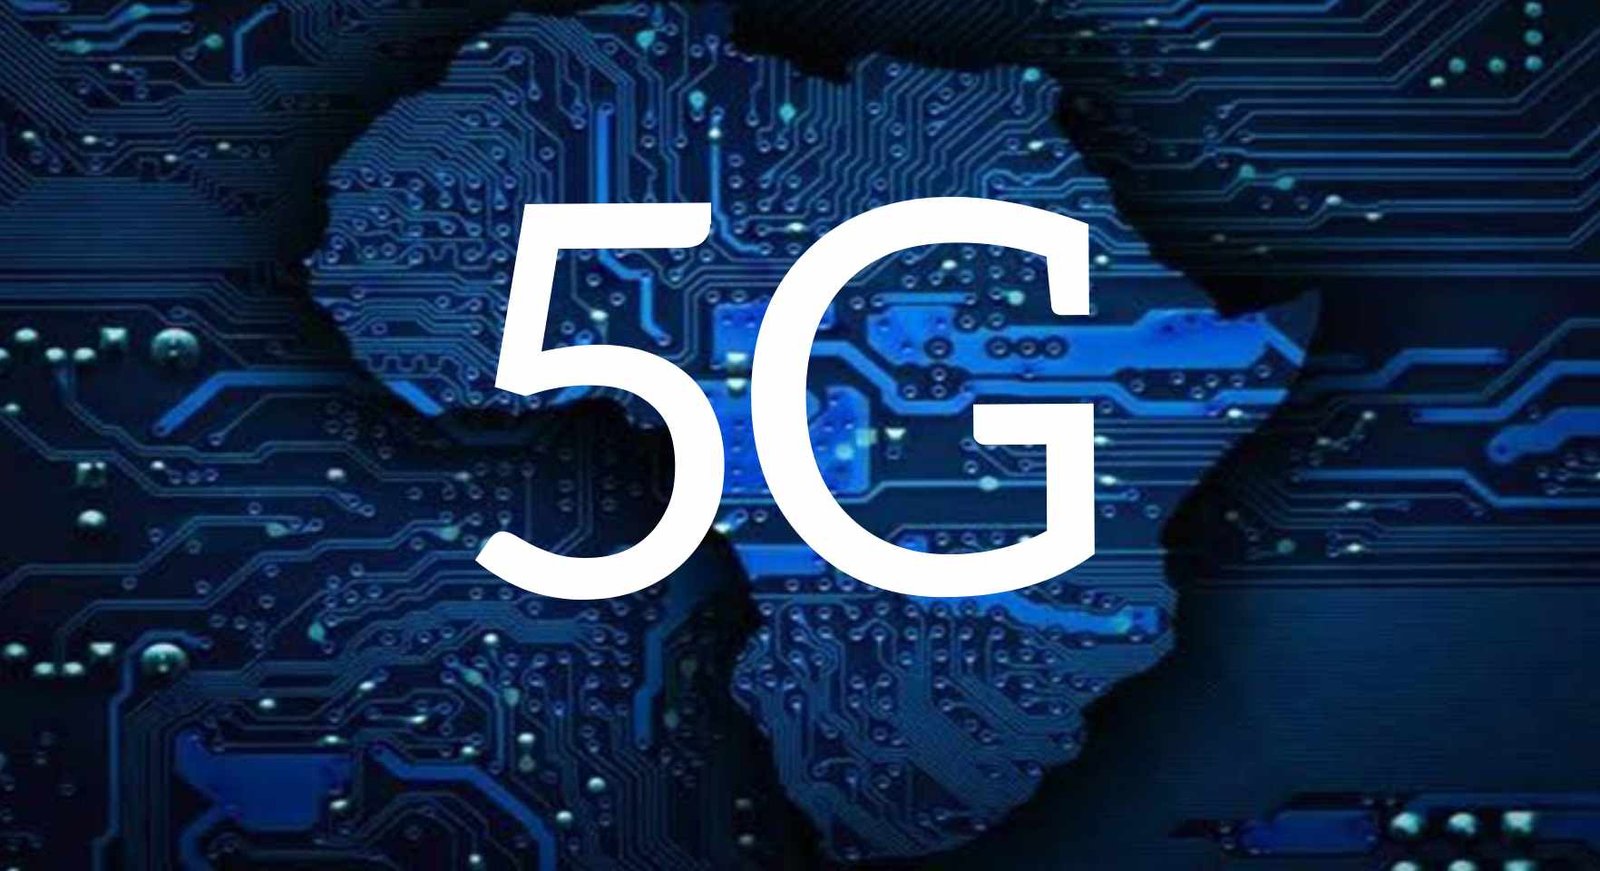 NCC Approves the use of Commercial 5G Services in Nigeria